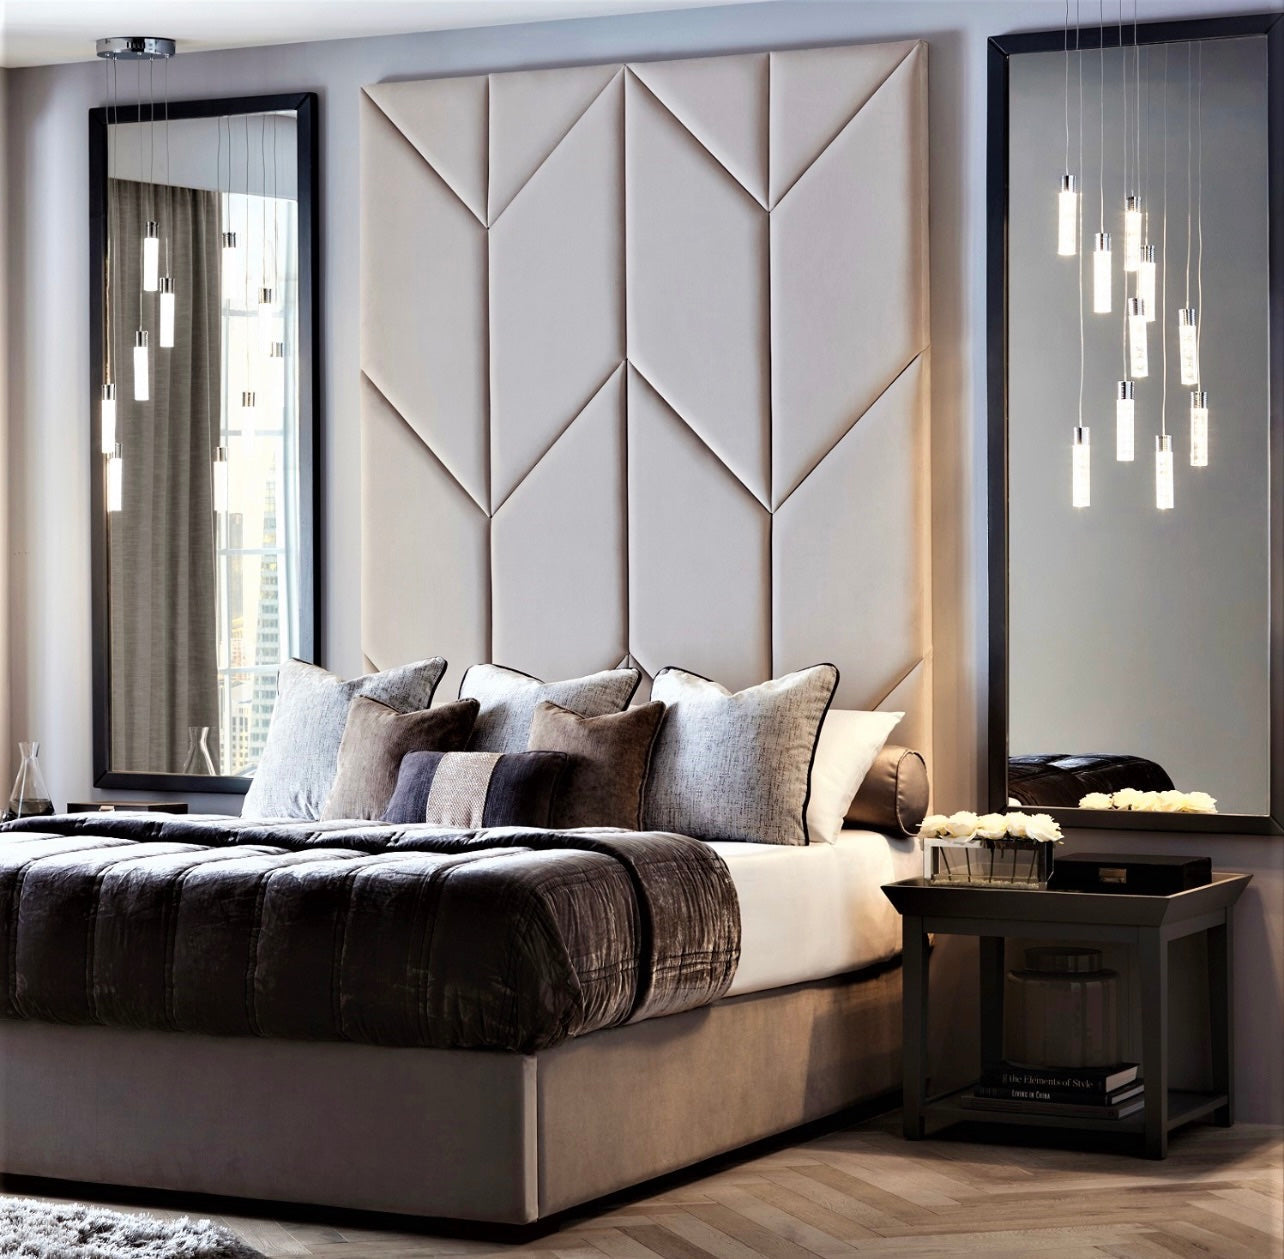 The luxury Wall Panel Bed Frame UK